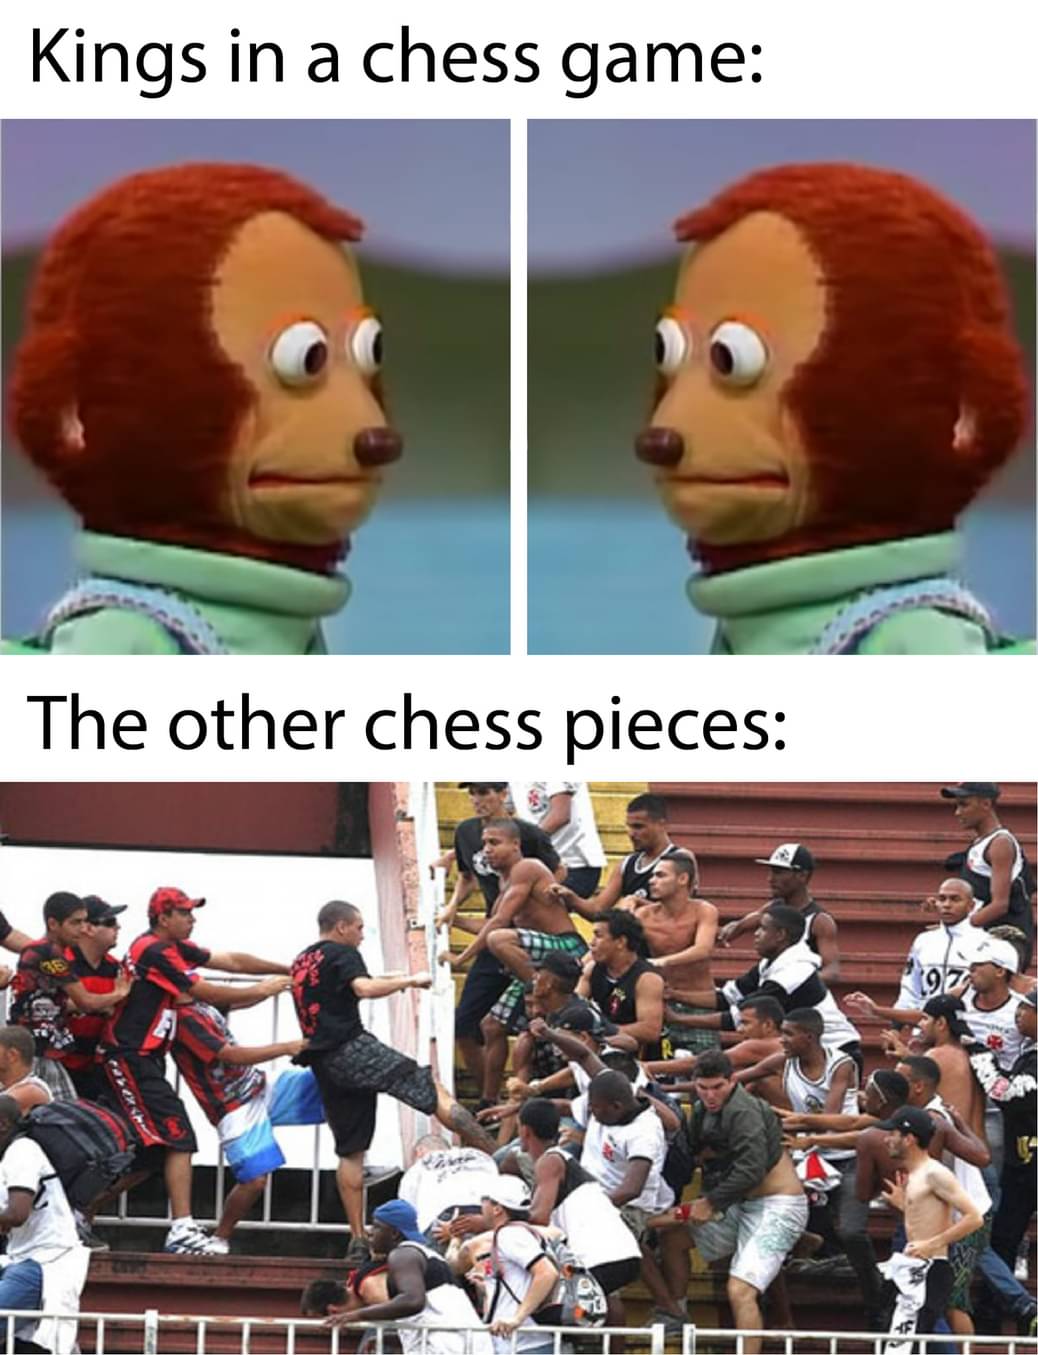 kings_in_a_chess_game.jpg